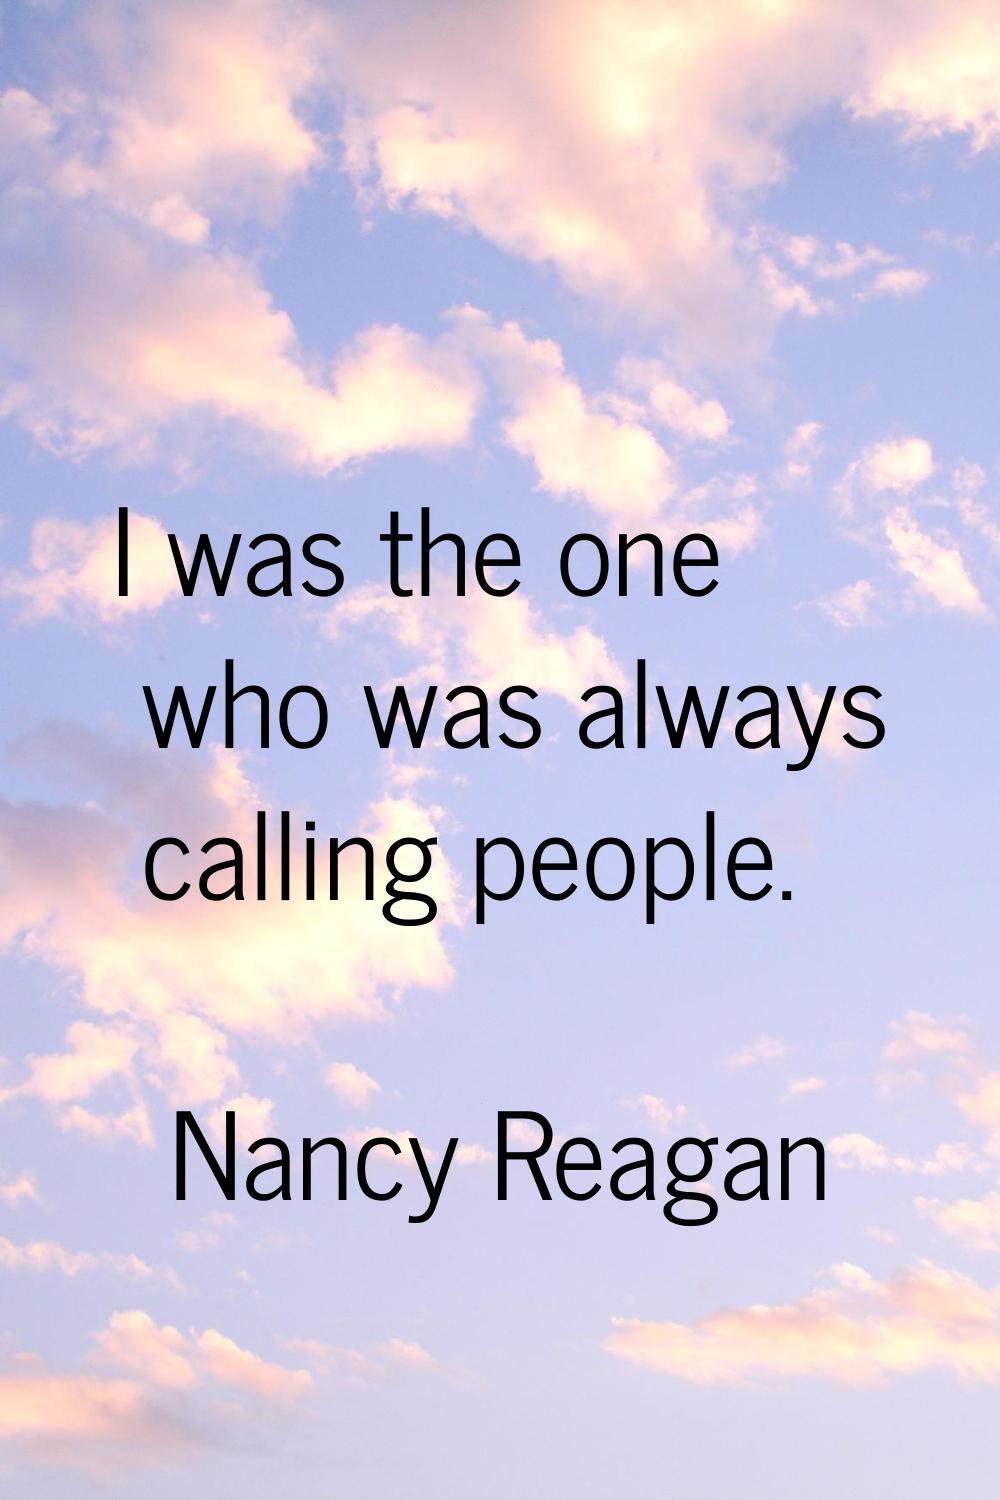 I was the one who was always calling people.